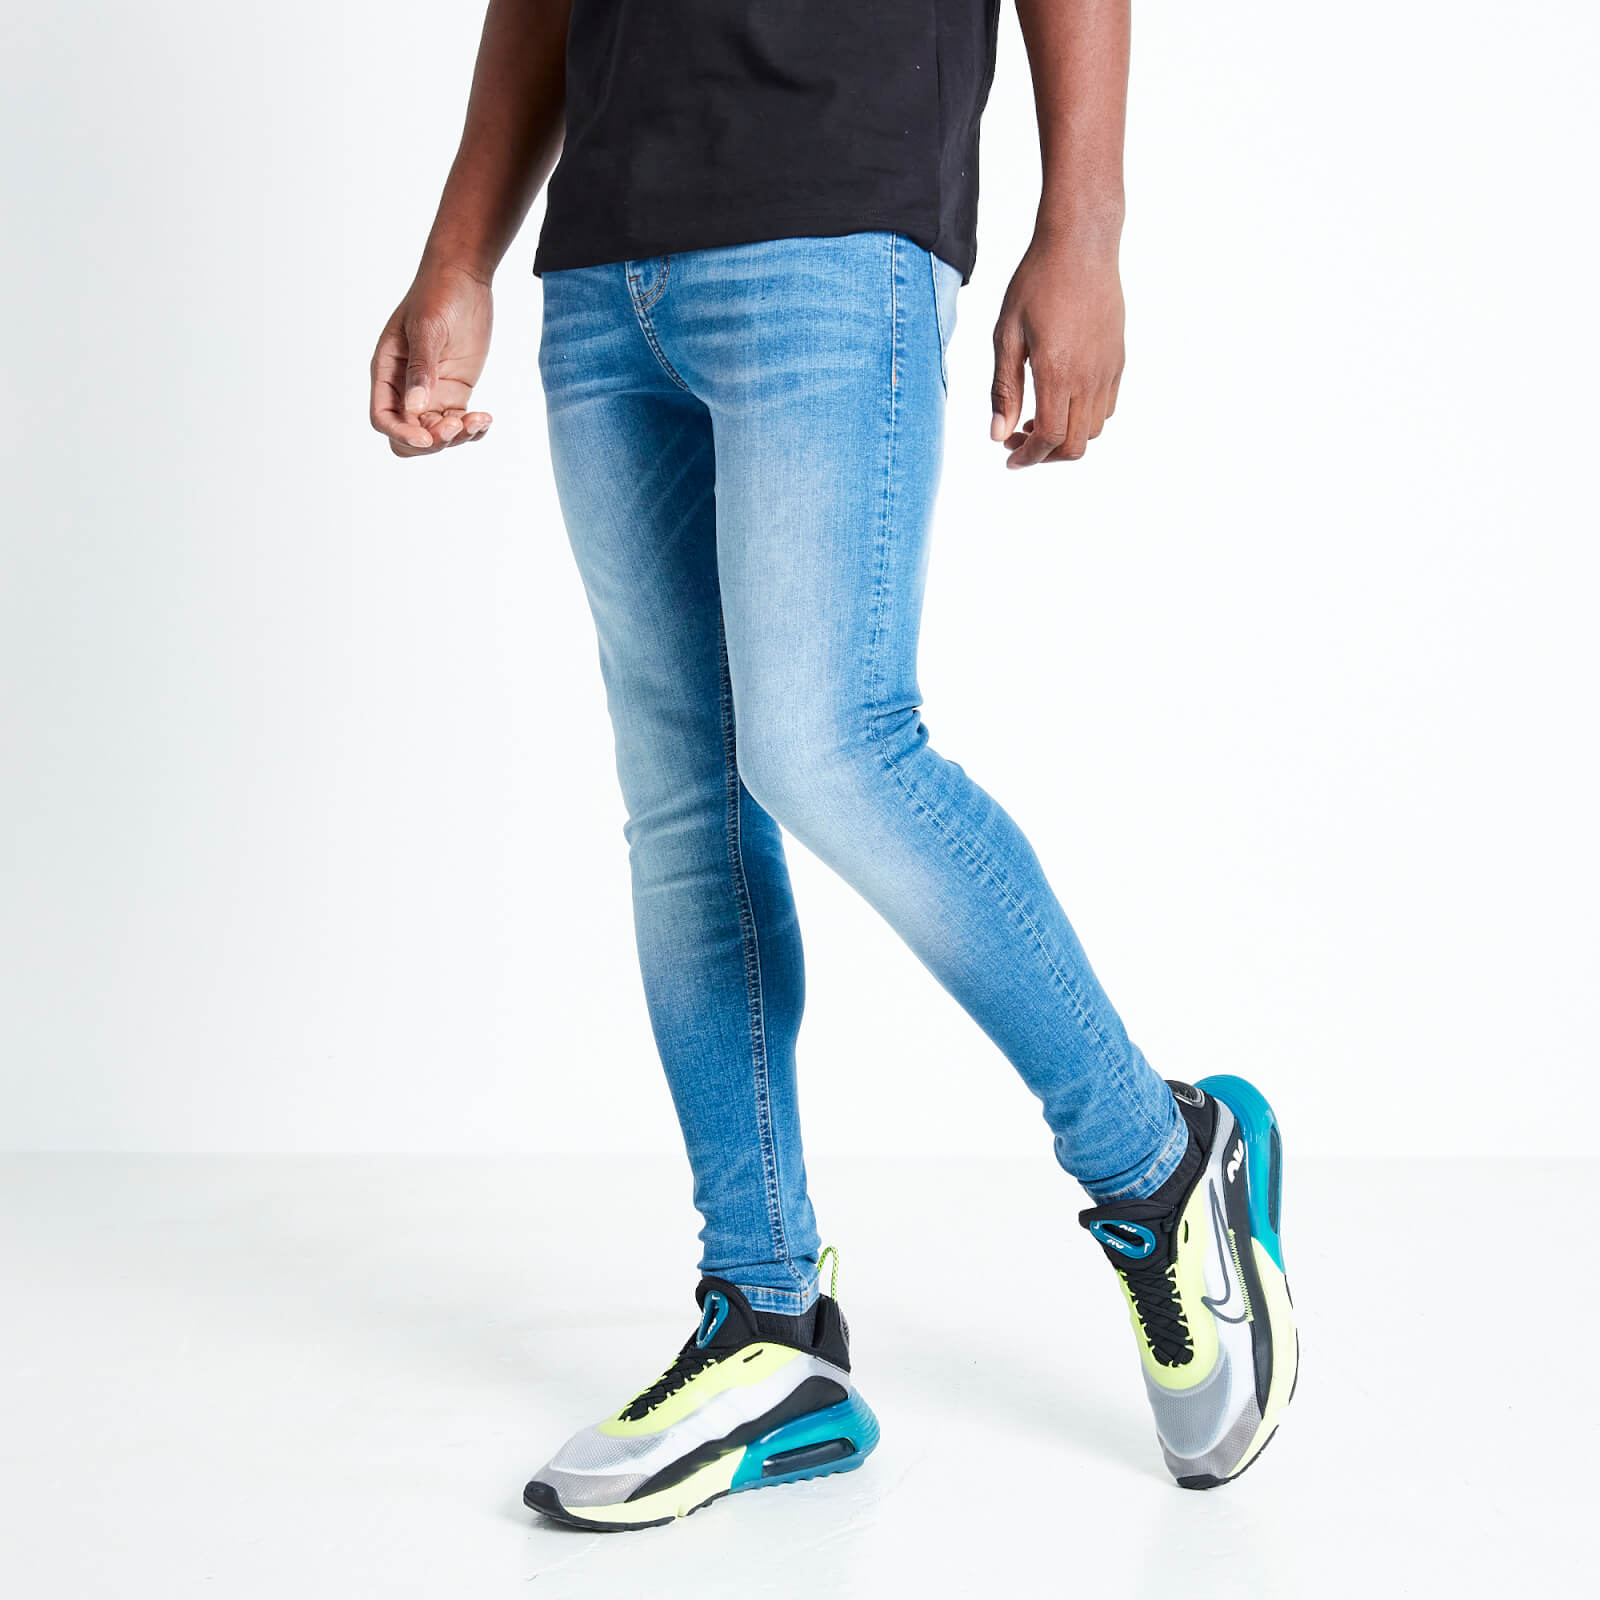 Sustainable Skinny Jean - W36 L30 from 11 Degrees